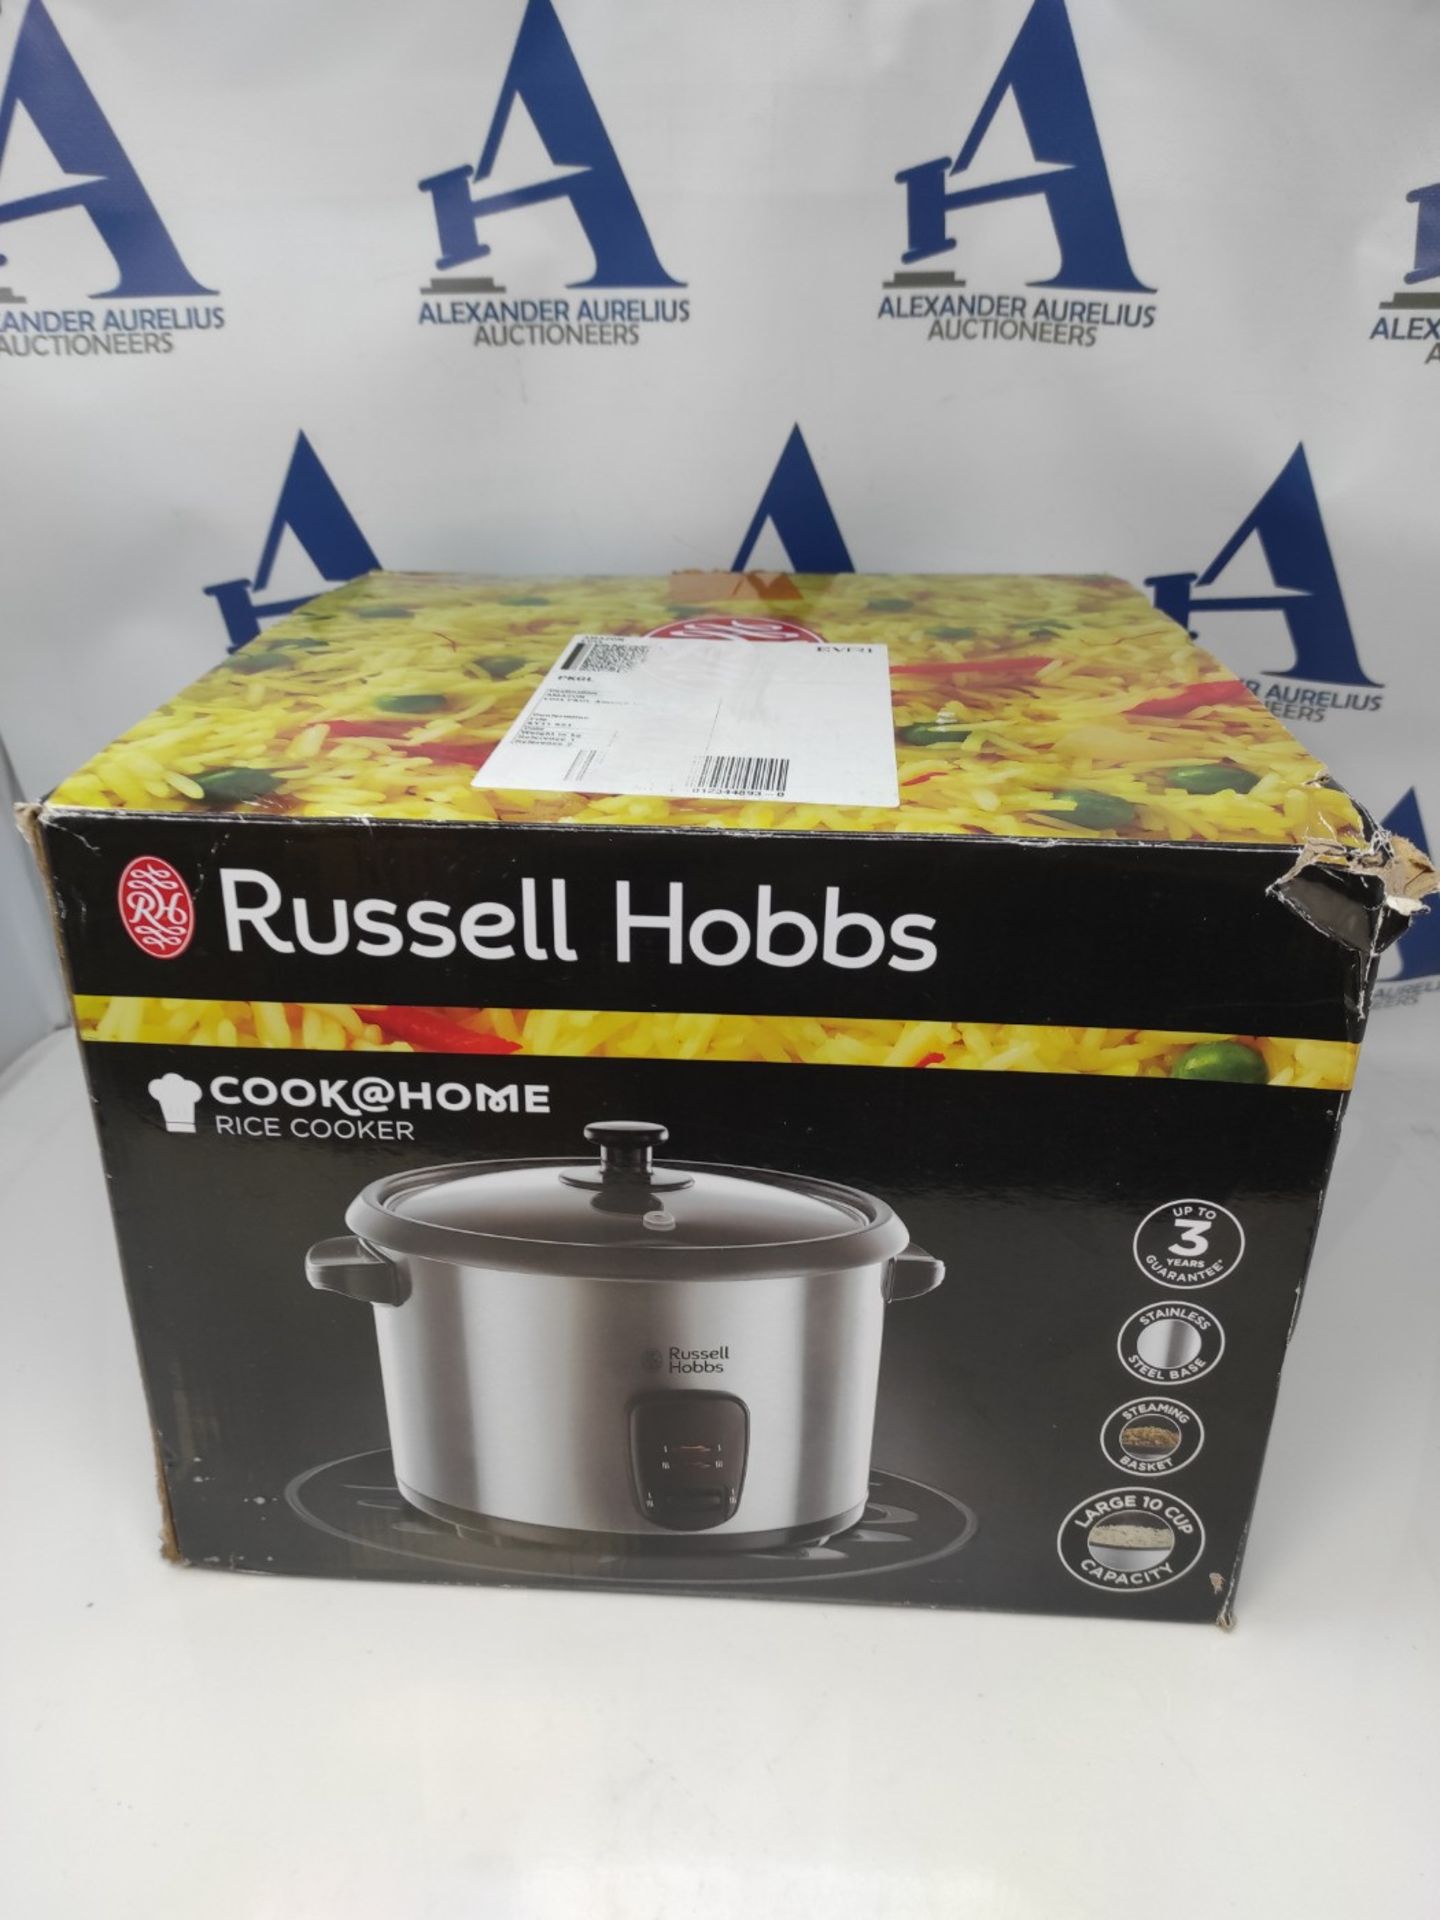 Russell Hobbs Electric Rice Cooker & Steamer - 1.8L (10 cup) Keep warm function, Remov - Image 2 of 3